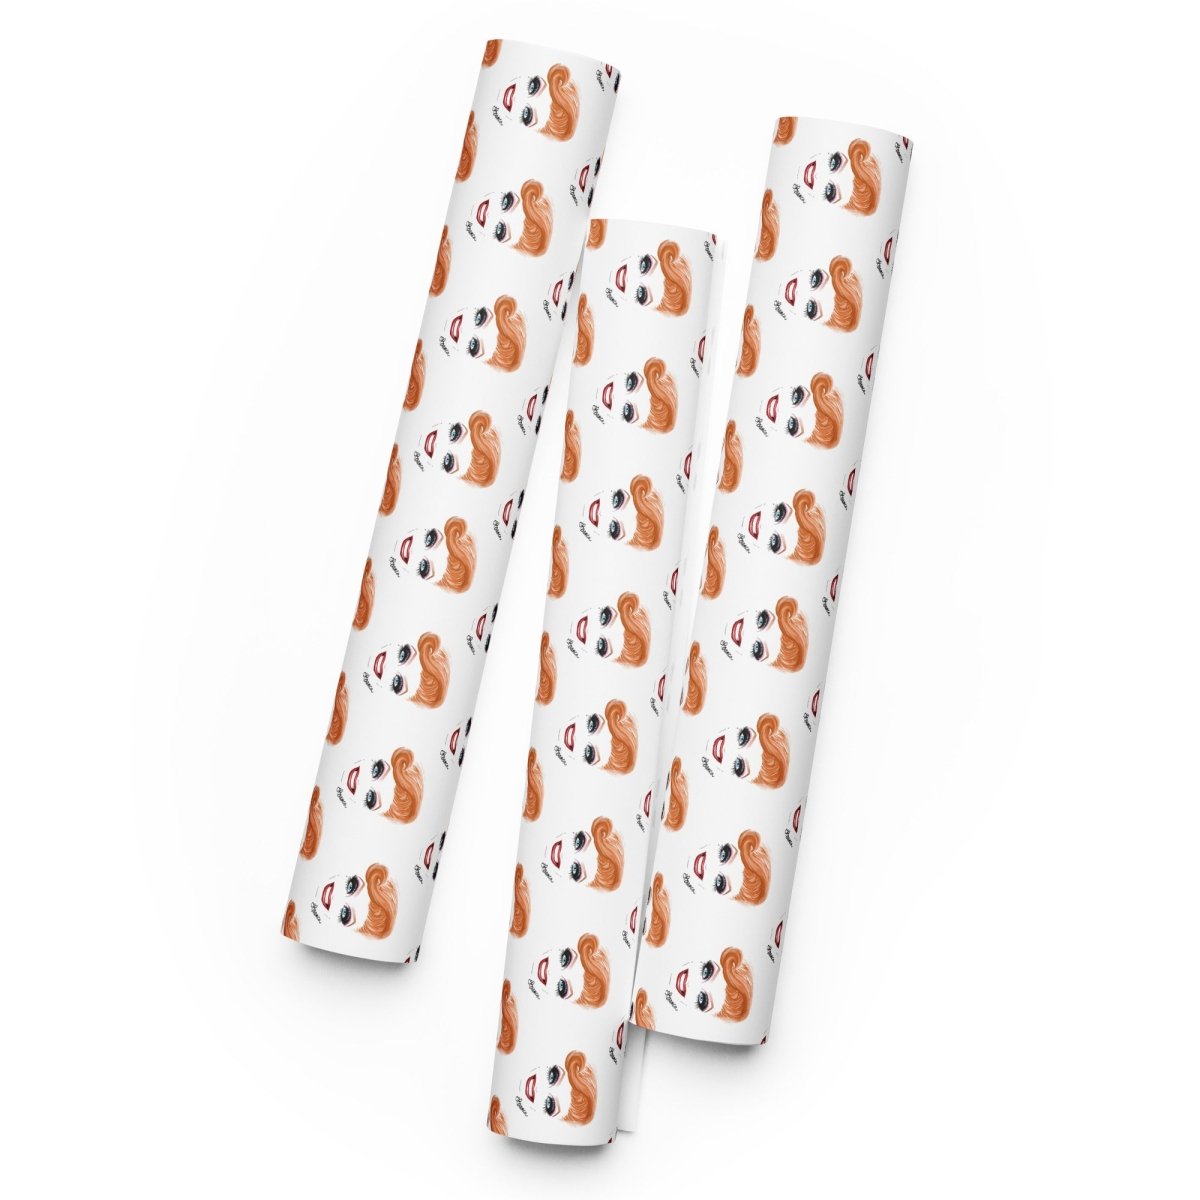 Bianca Del Rio - Signature Wrapping paper sheets - dragqueenmerch